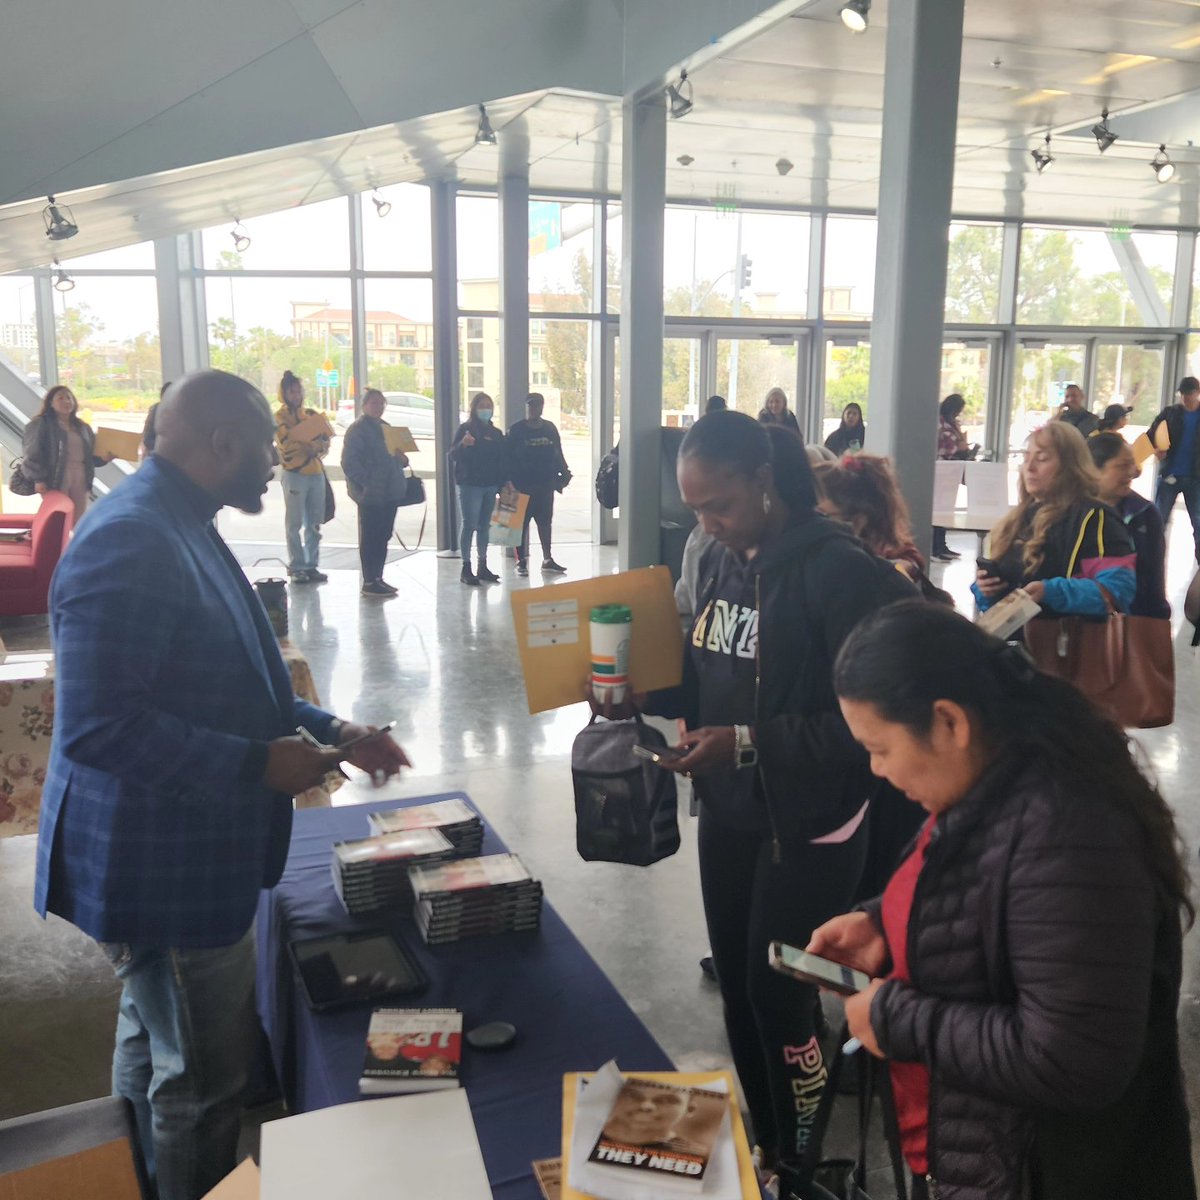 Los Angeles Unified School District thanks for the opportunity to pour into your Para Professionals! #education #educationmatters #leadershipdevelopment #leadershipcoaching #selfcare #mentalhealth #mentalhealthawareness @LAUSD_Achieve